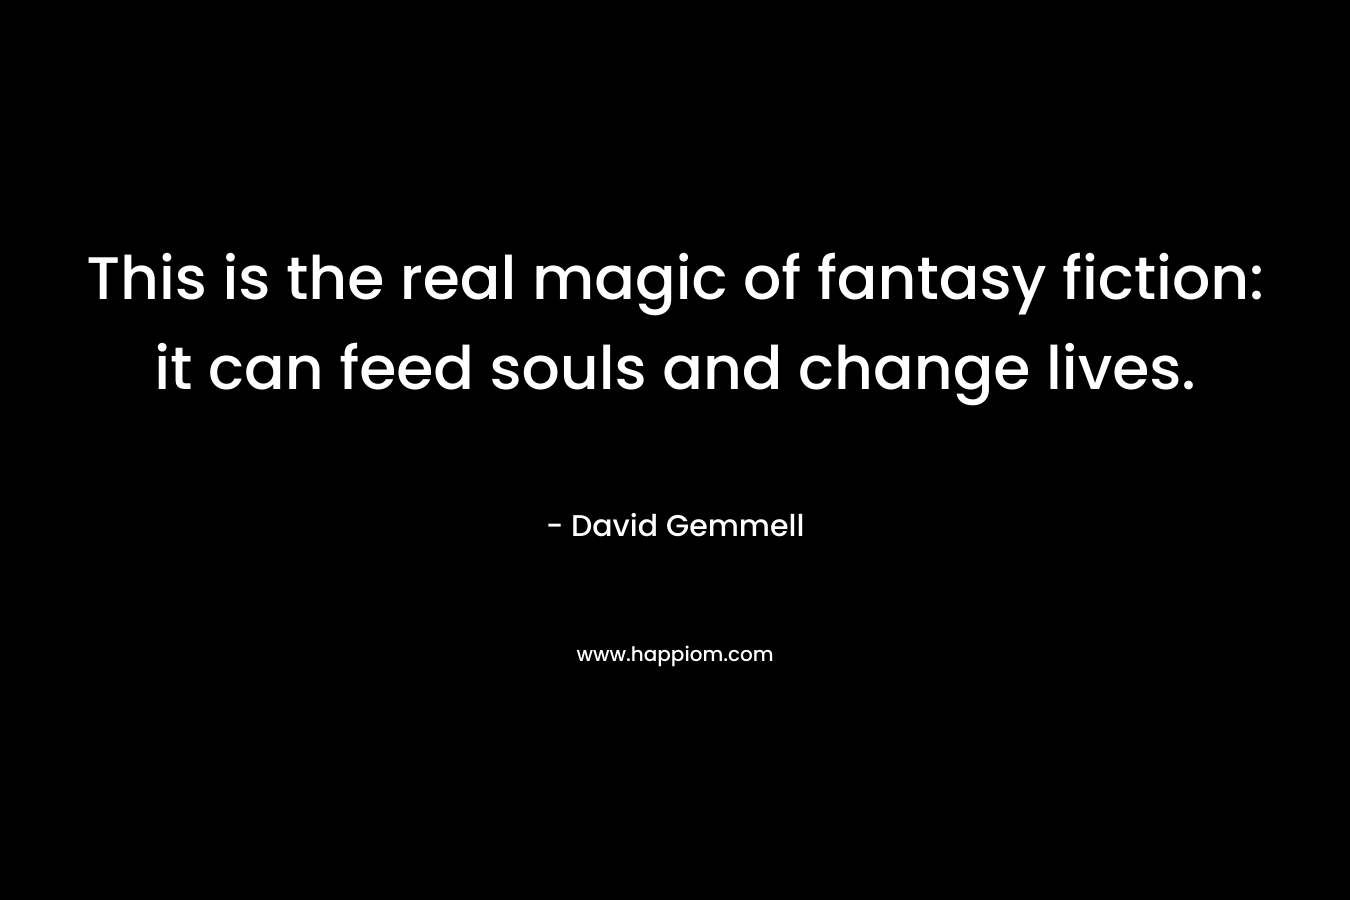 This is the real magic of fantasy fiction: it can feed souls and change lives. – David Gemmell